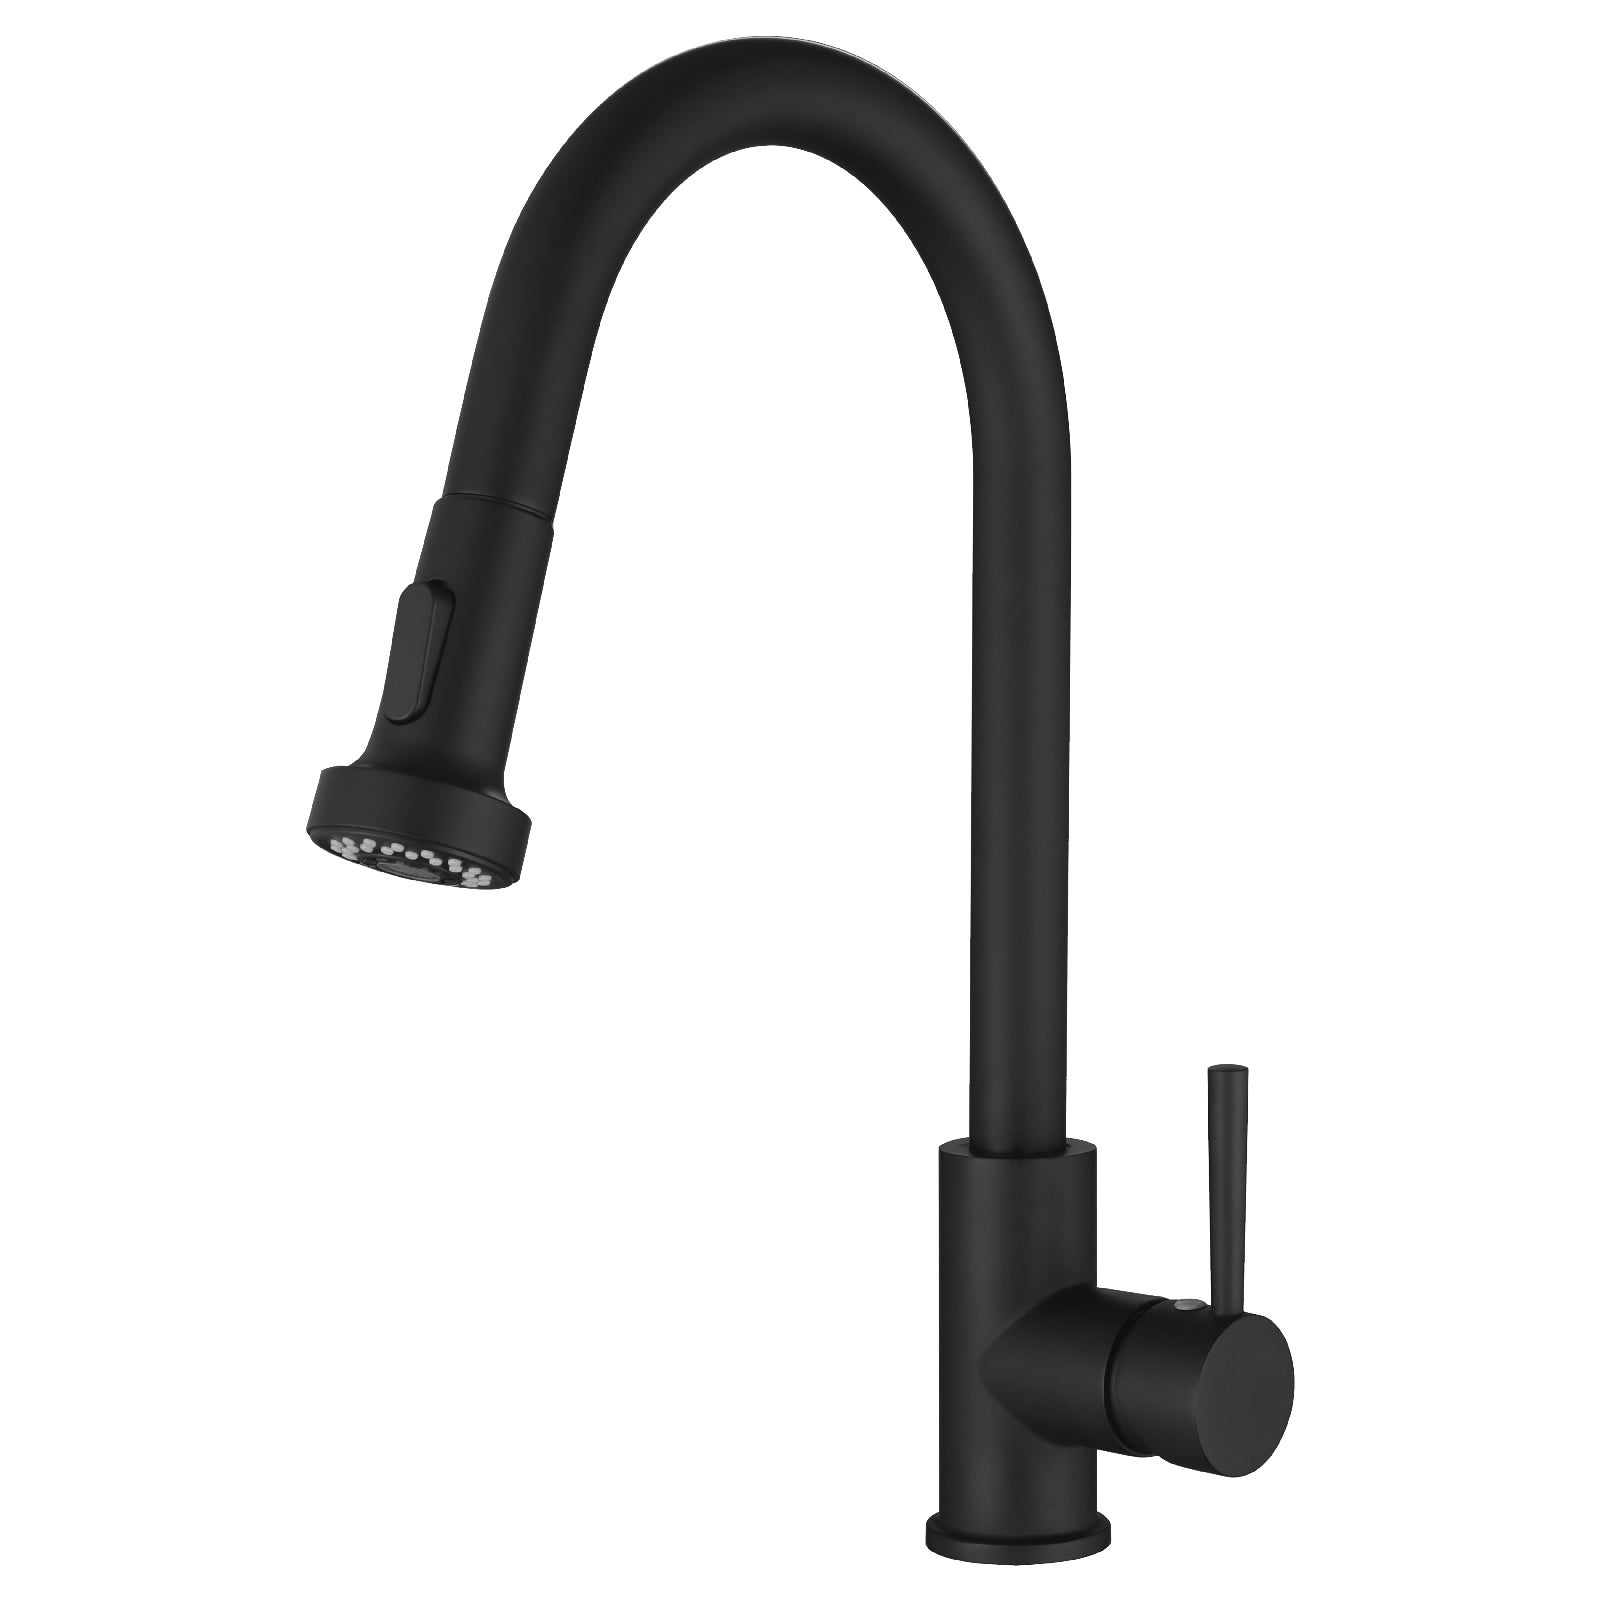 Decaura Pull Out Kitchen Mixer Tap Black Basin Taps Faucet Swivel Spout Brass 2-Way